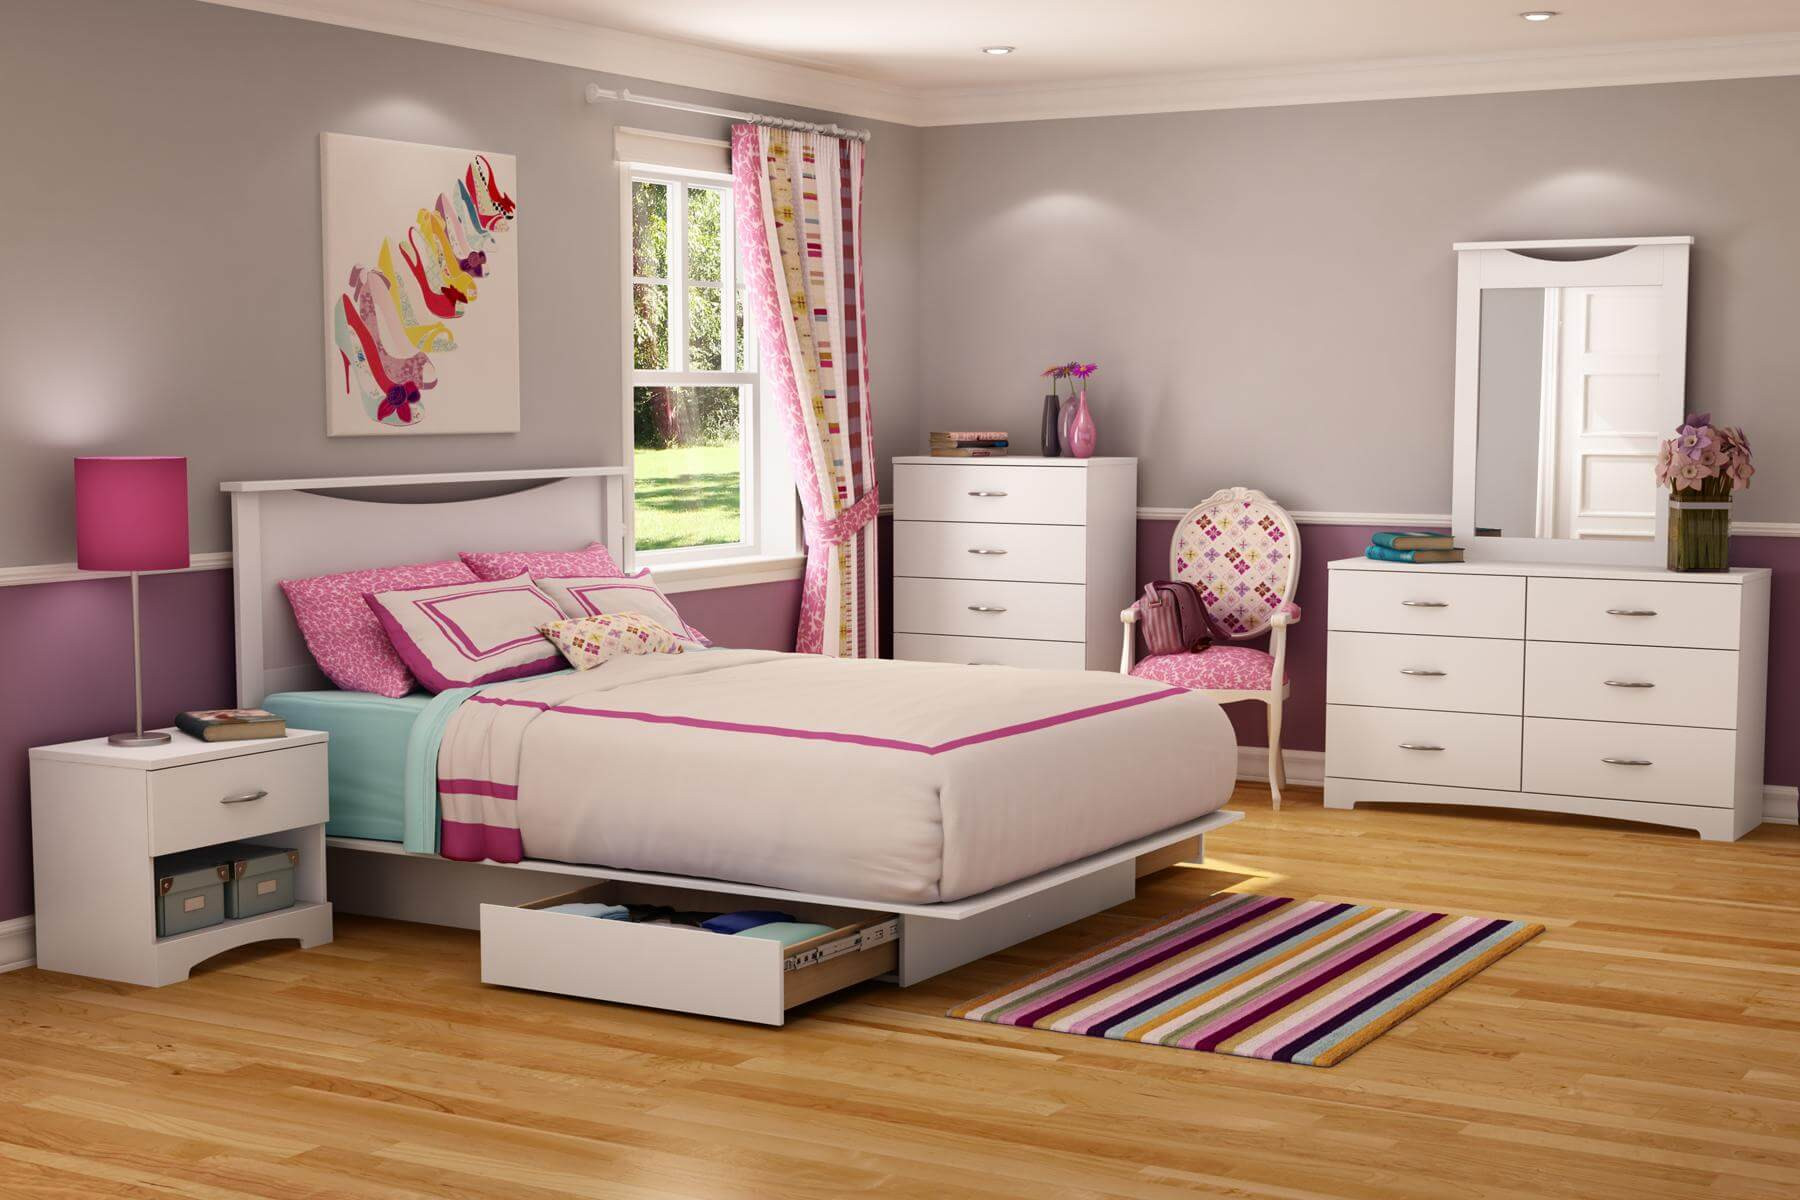 Girls Bedroom Funiture
 25 Romantic and Modern Ideas for Girls Bedroom Sets